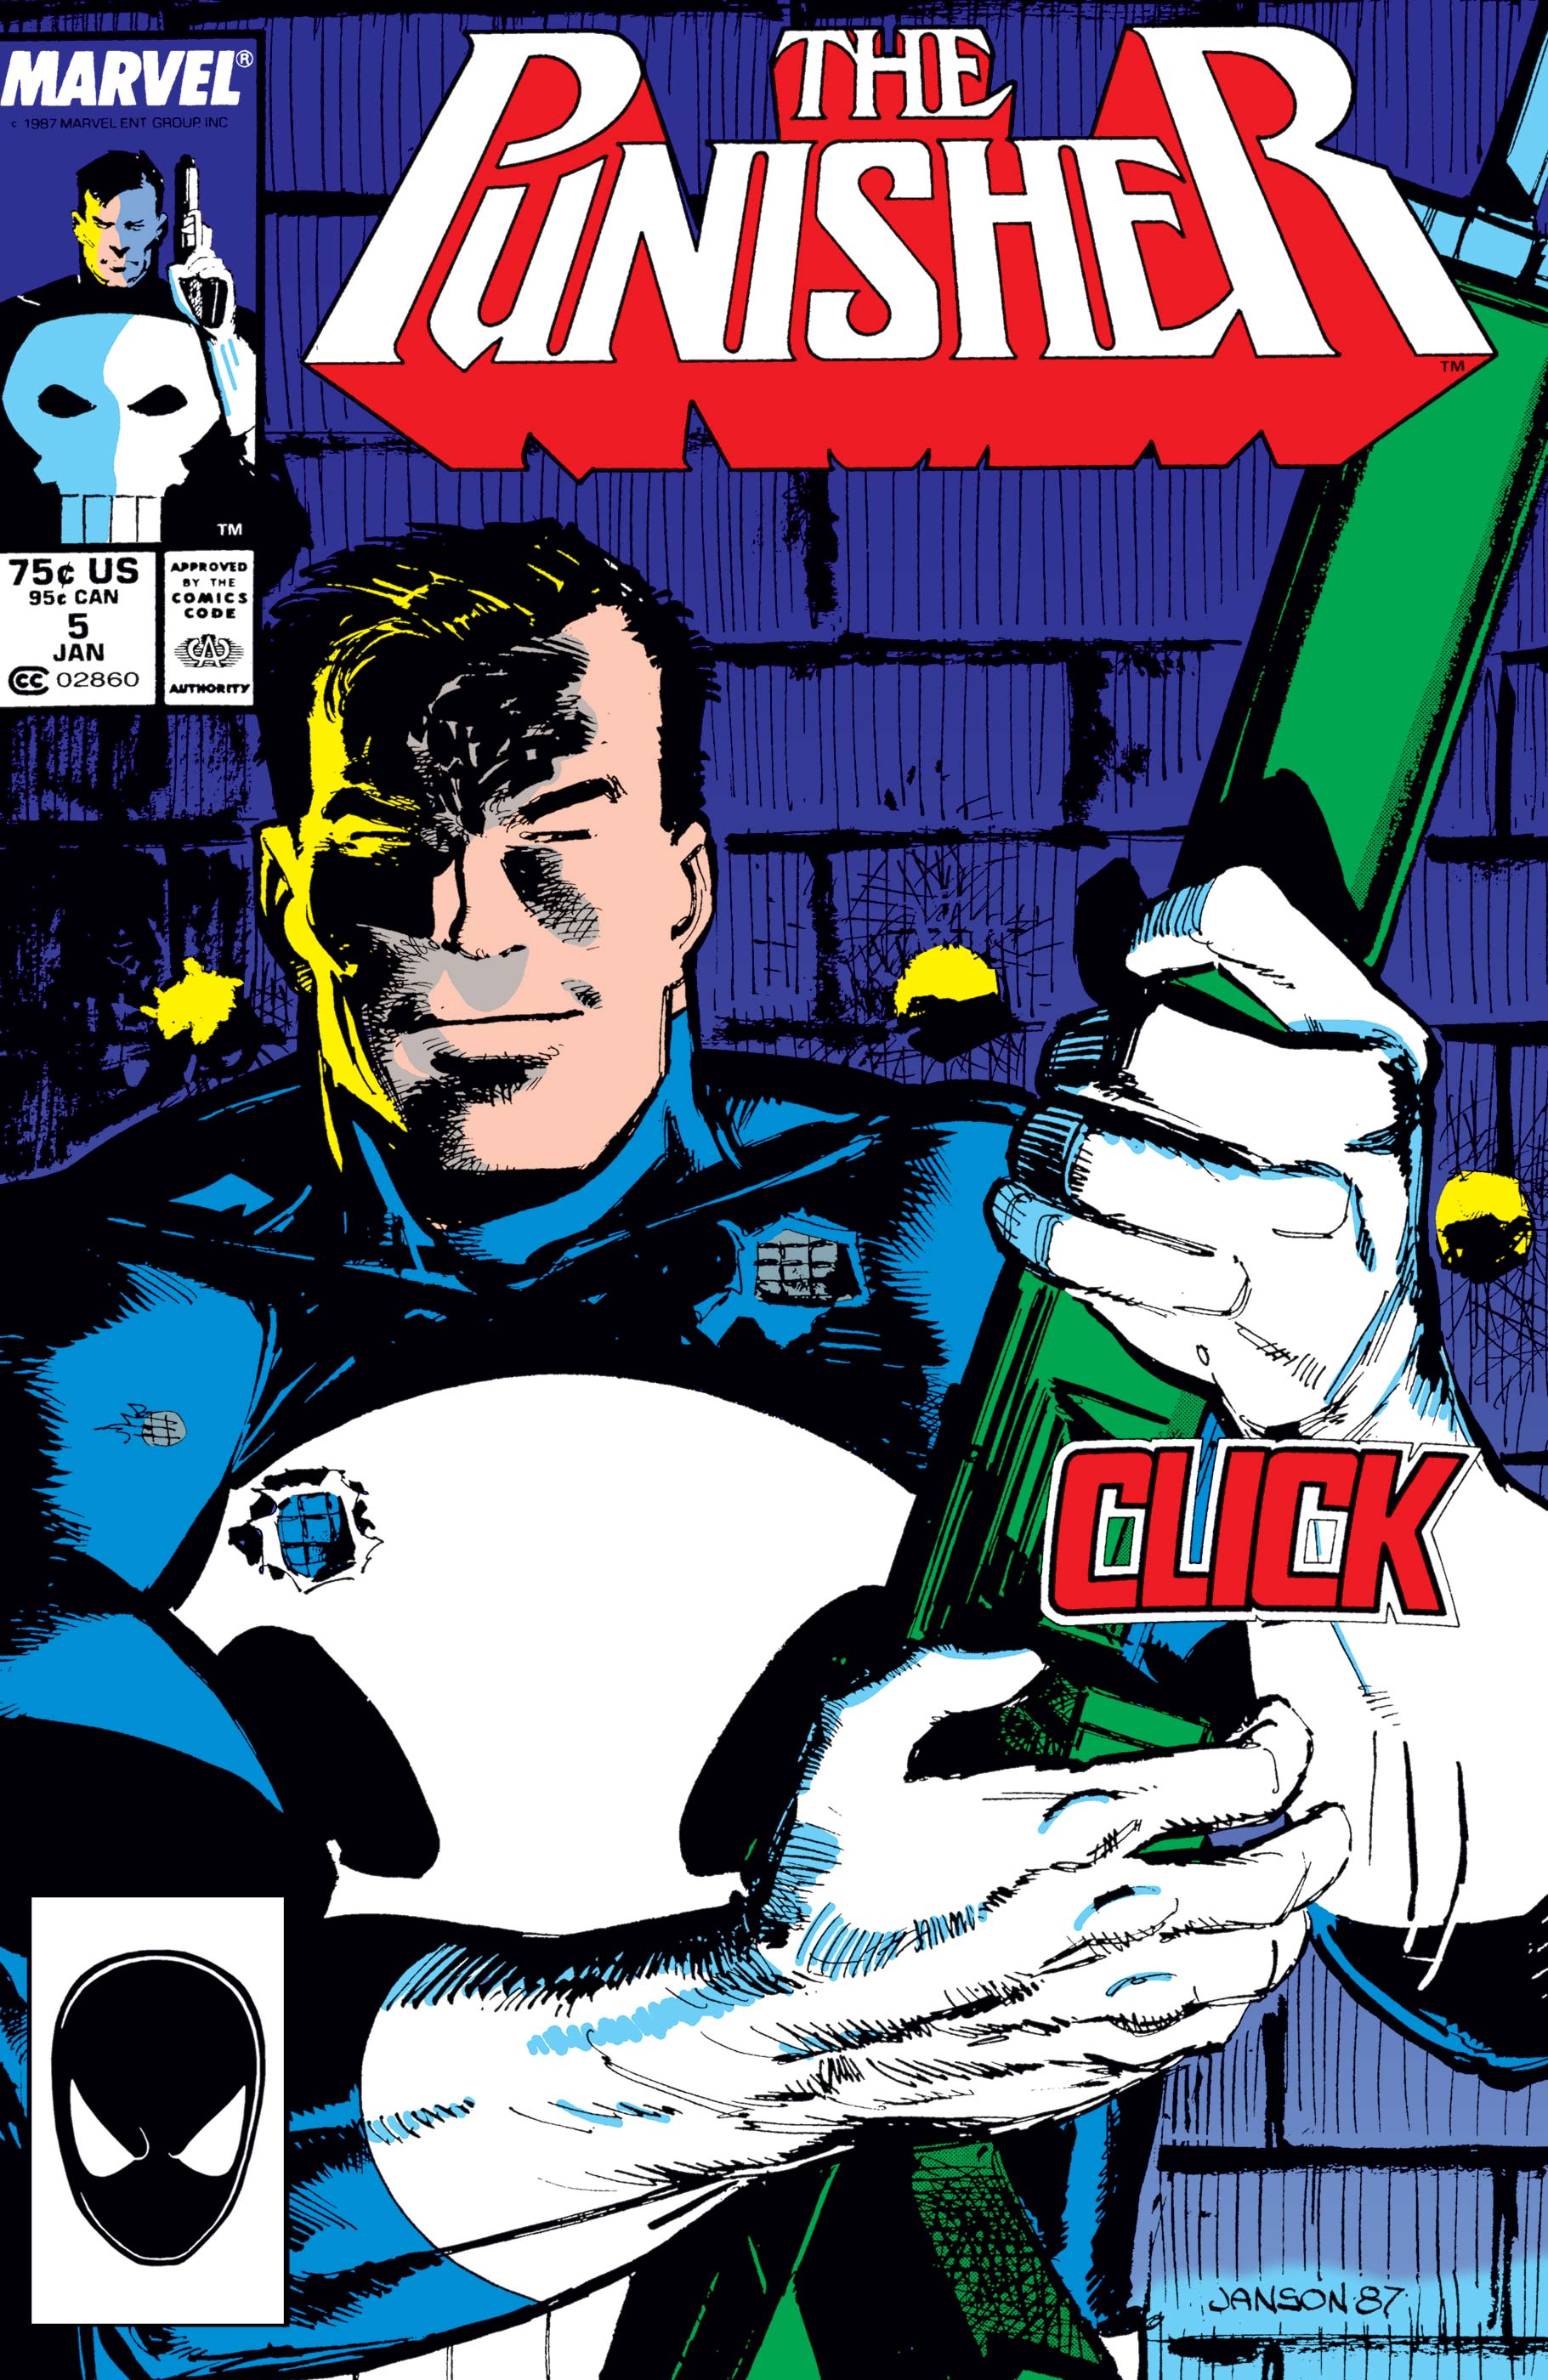 The Punisher (1987) #5